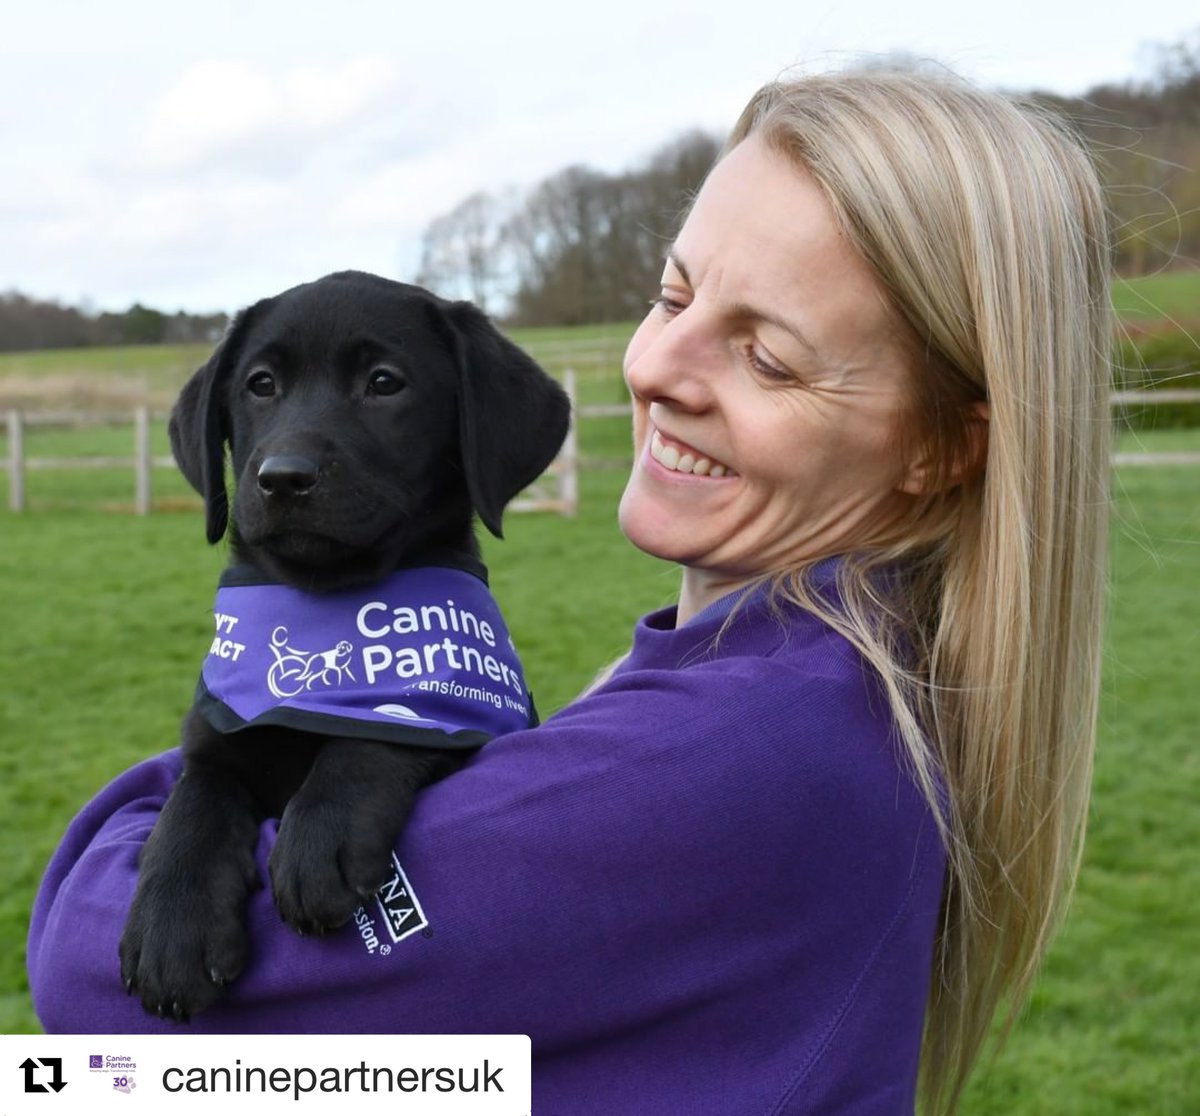 @caninepartnersuk 
As it’s our 30th anniversary this year, we asked our volunteers why they love to volunteer for Canine Partners. They gave us a very long list of fantastic reasons to get involved!⠀
⠀
Find out more on their blog! 
caninepartners.co.uk